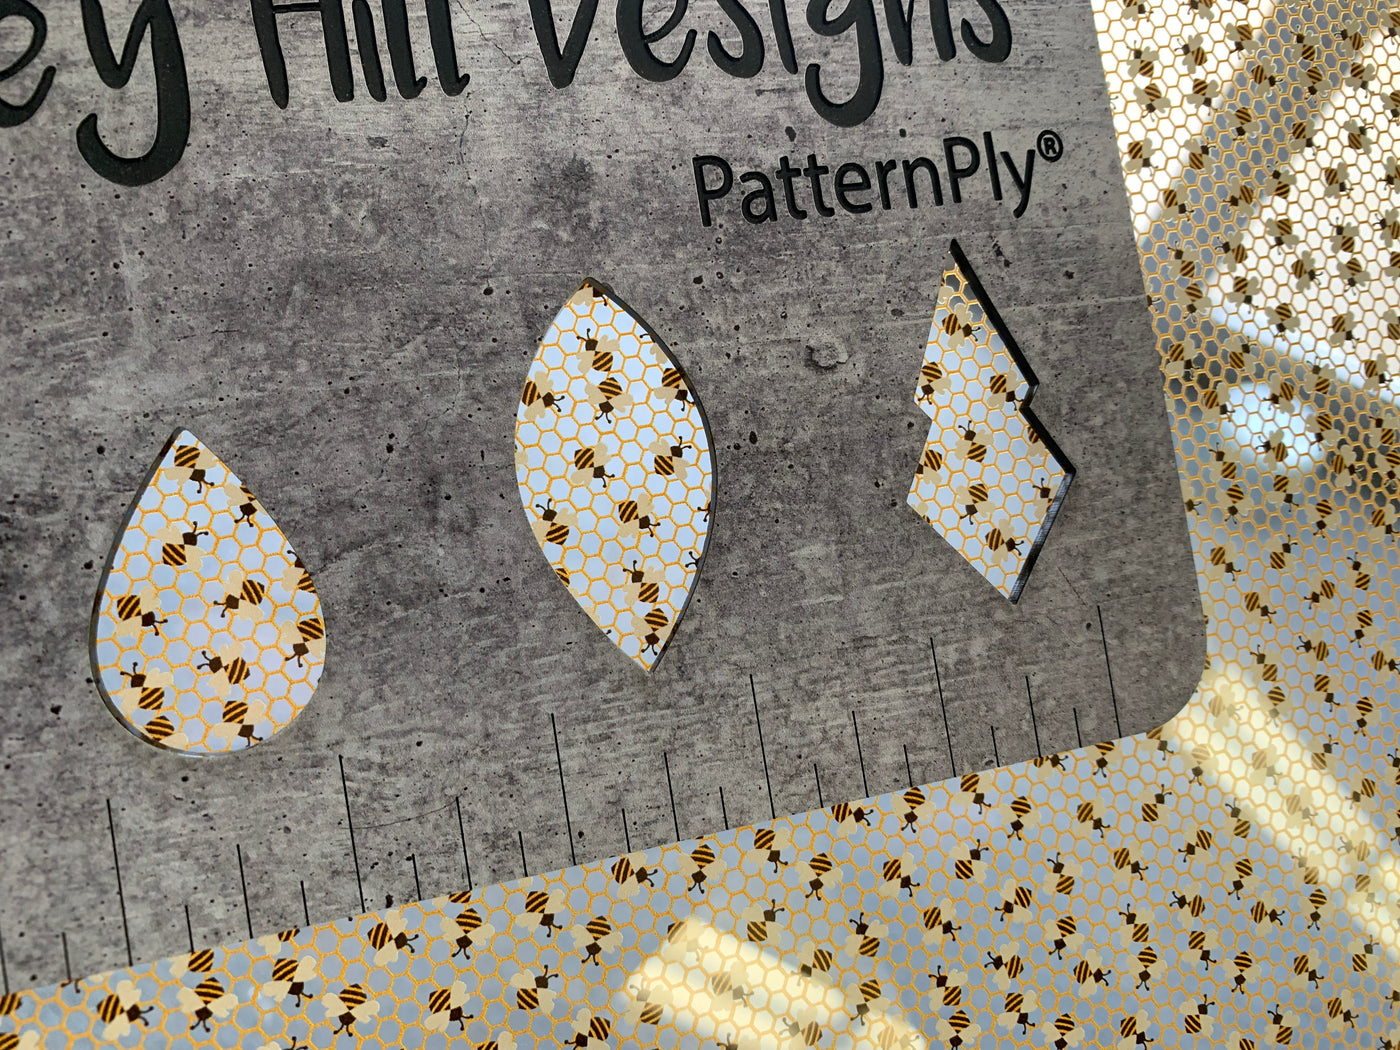 PatternPly® Scattered Micro Bees